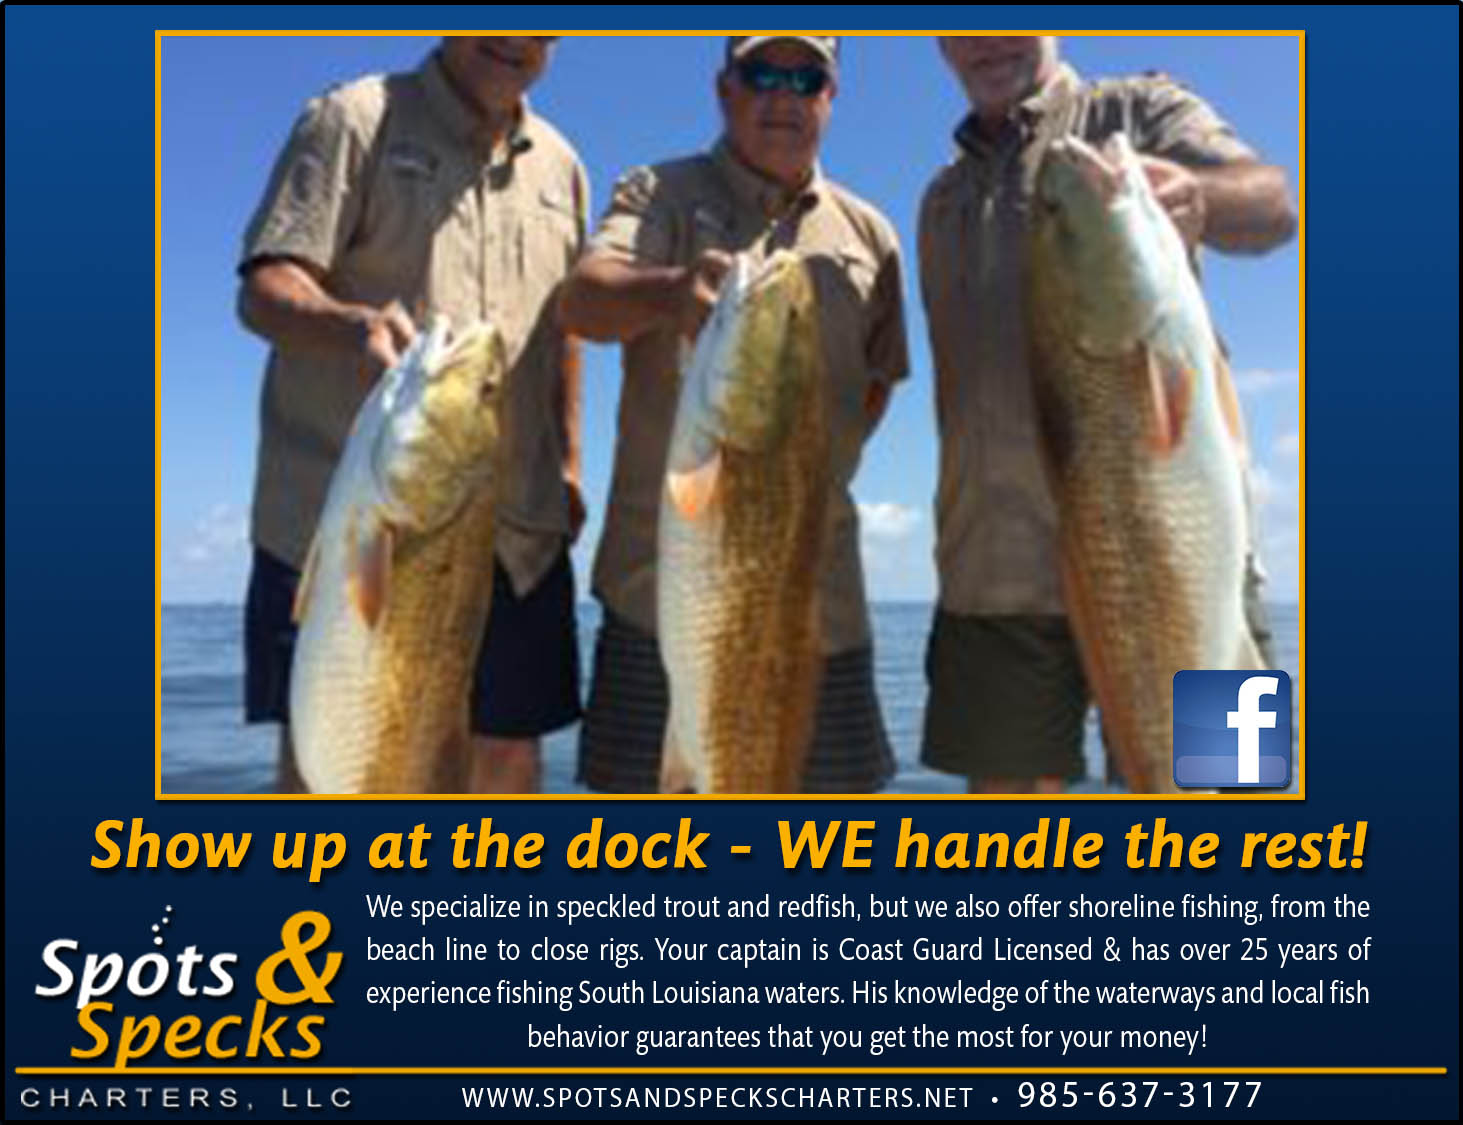 Spots and Specks Charters